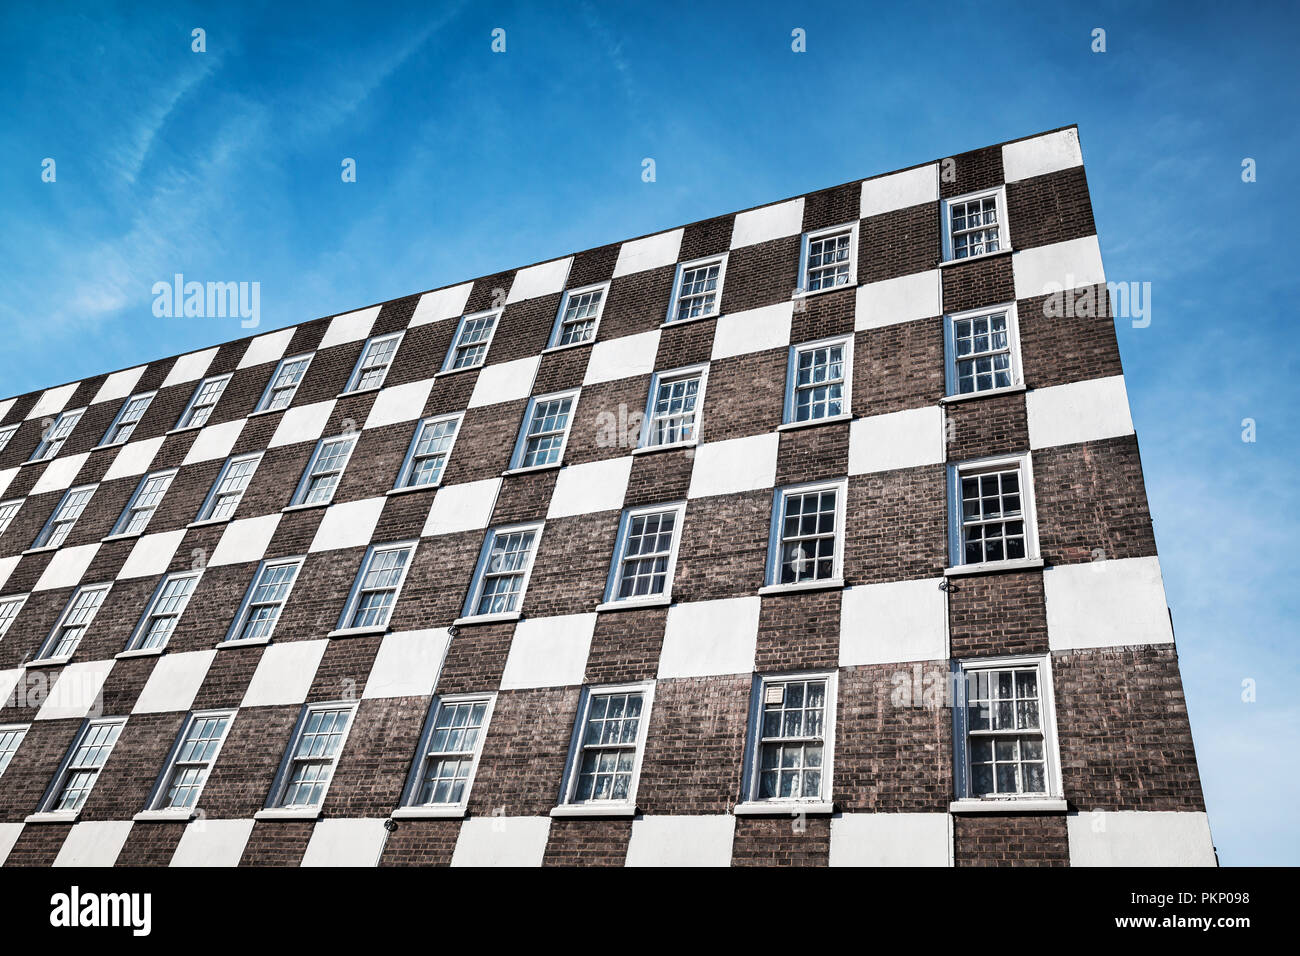 Old living house wall with brown white checker pattern design Stock Photo